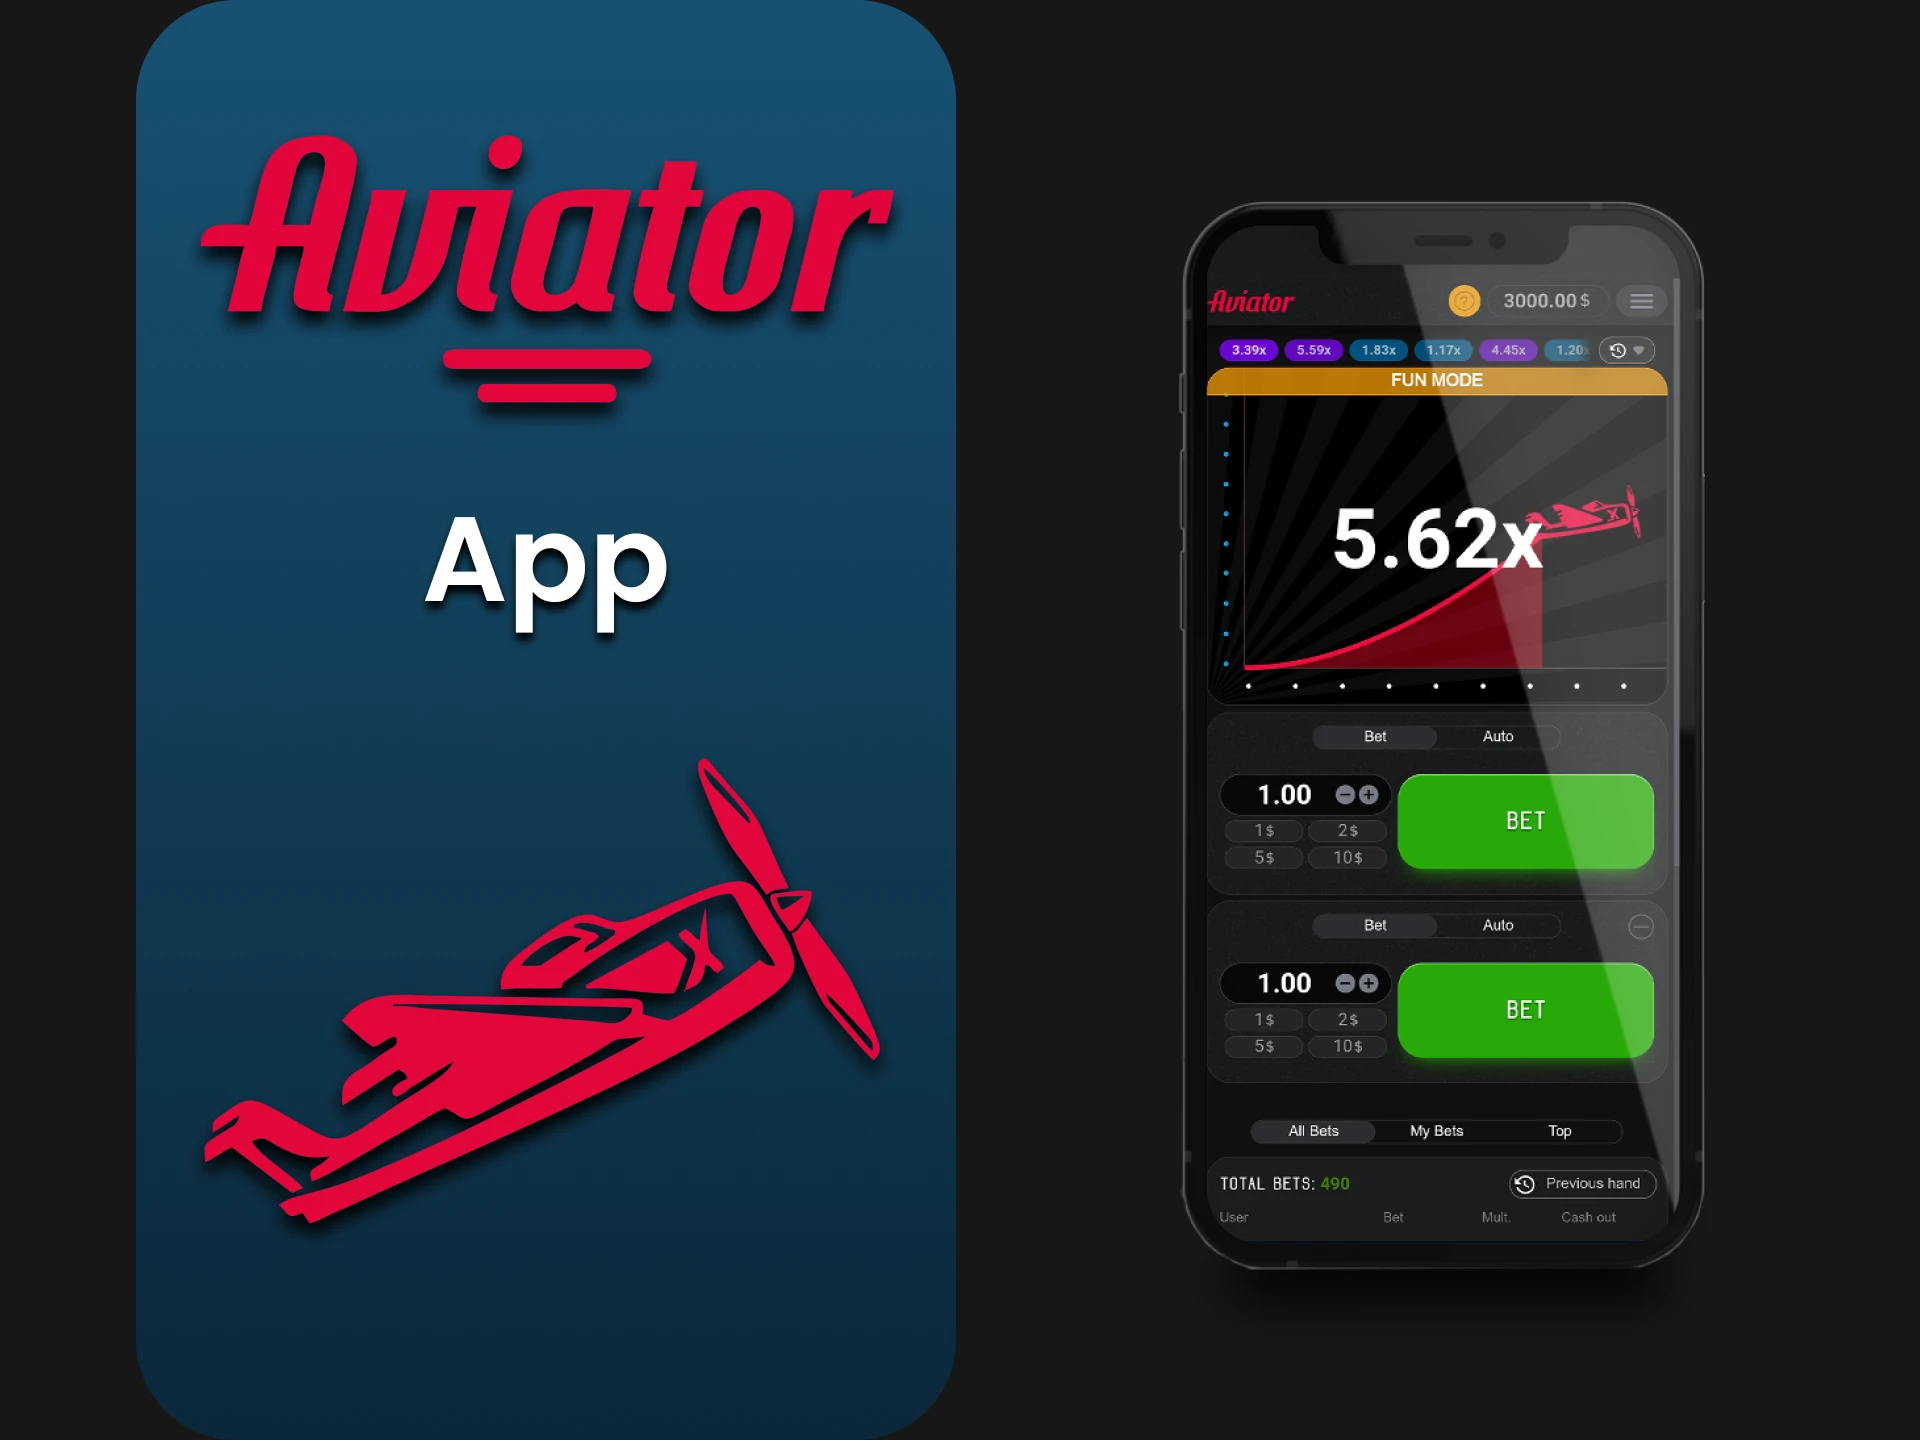 Download the Aviator app on your smartphone.